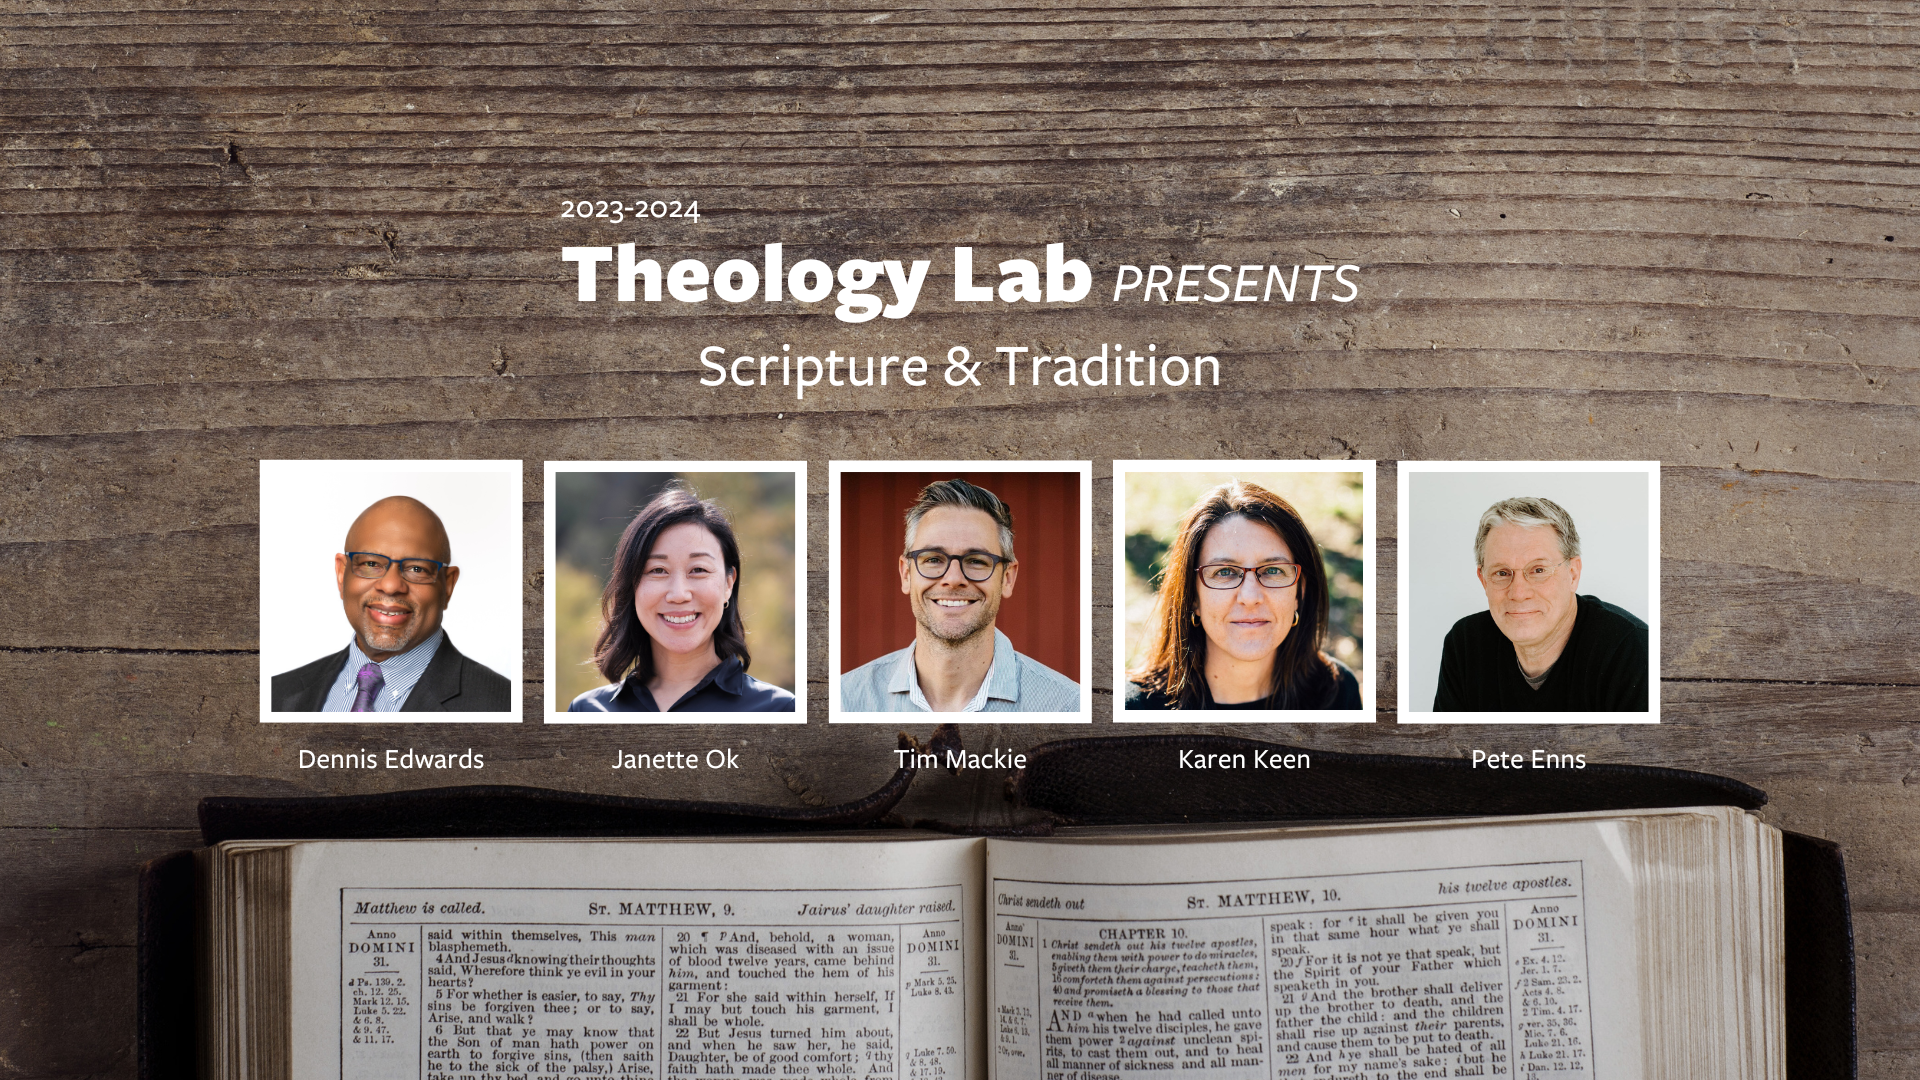 The event title, Theology Lab presents Scripture and Tradition, atop a wooden table with an open Bible on it. Includes headshots of speakers.